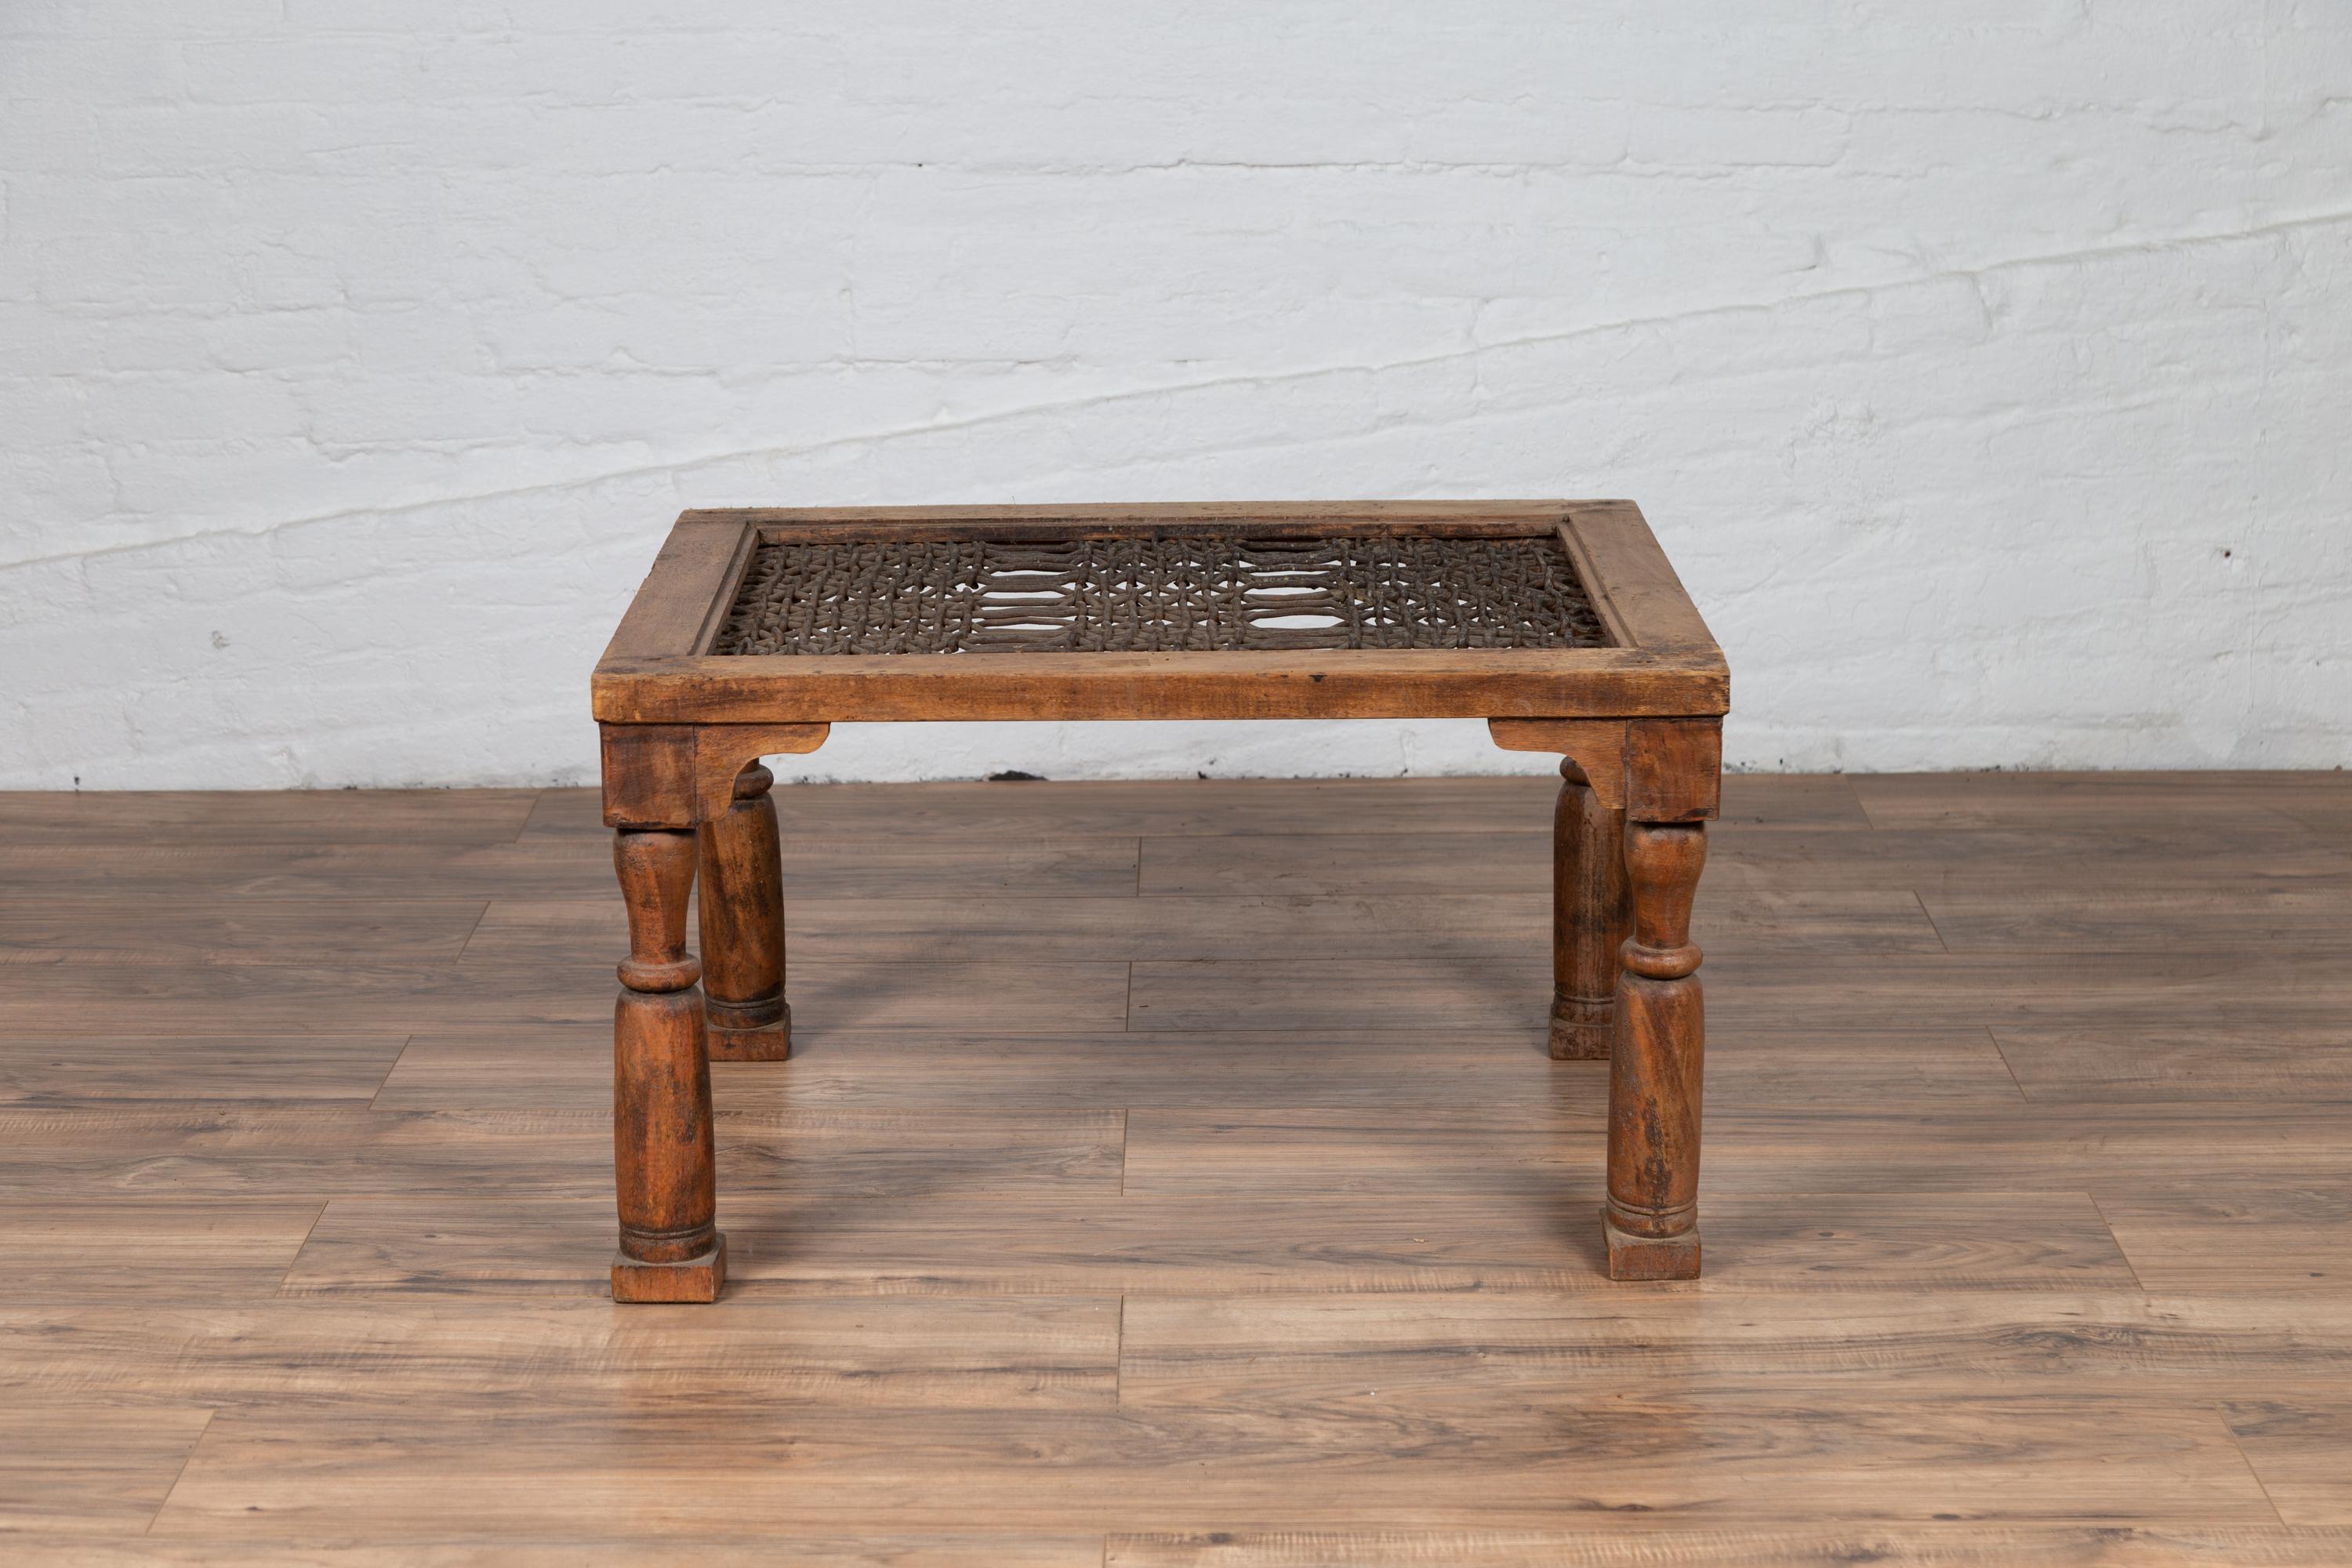 An antique Indian side table from the 19th century with window grate top, turned legs and spandrels. Born in India during the 19th century, this Indian coffee table features a rectangular top made of an iron window grate, resting on four turned